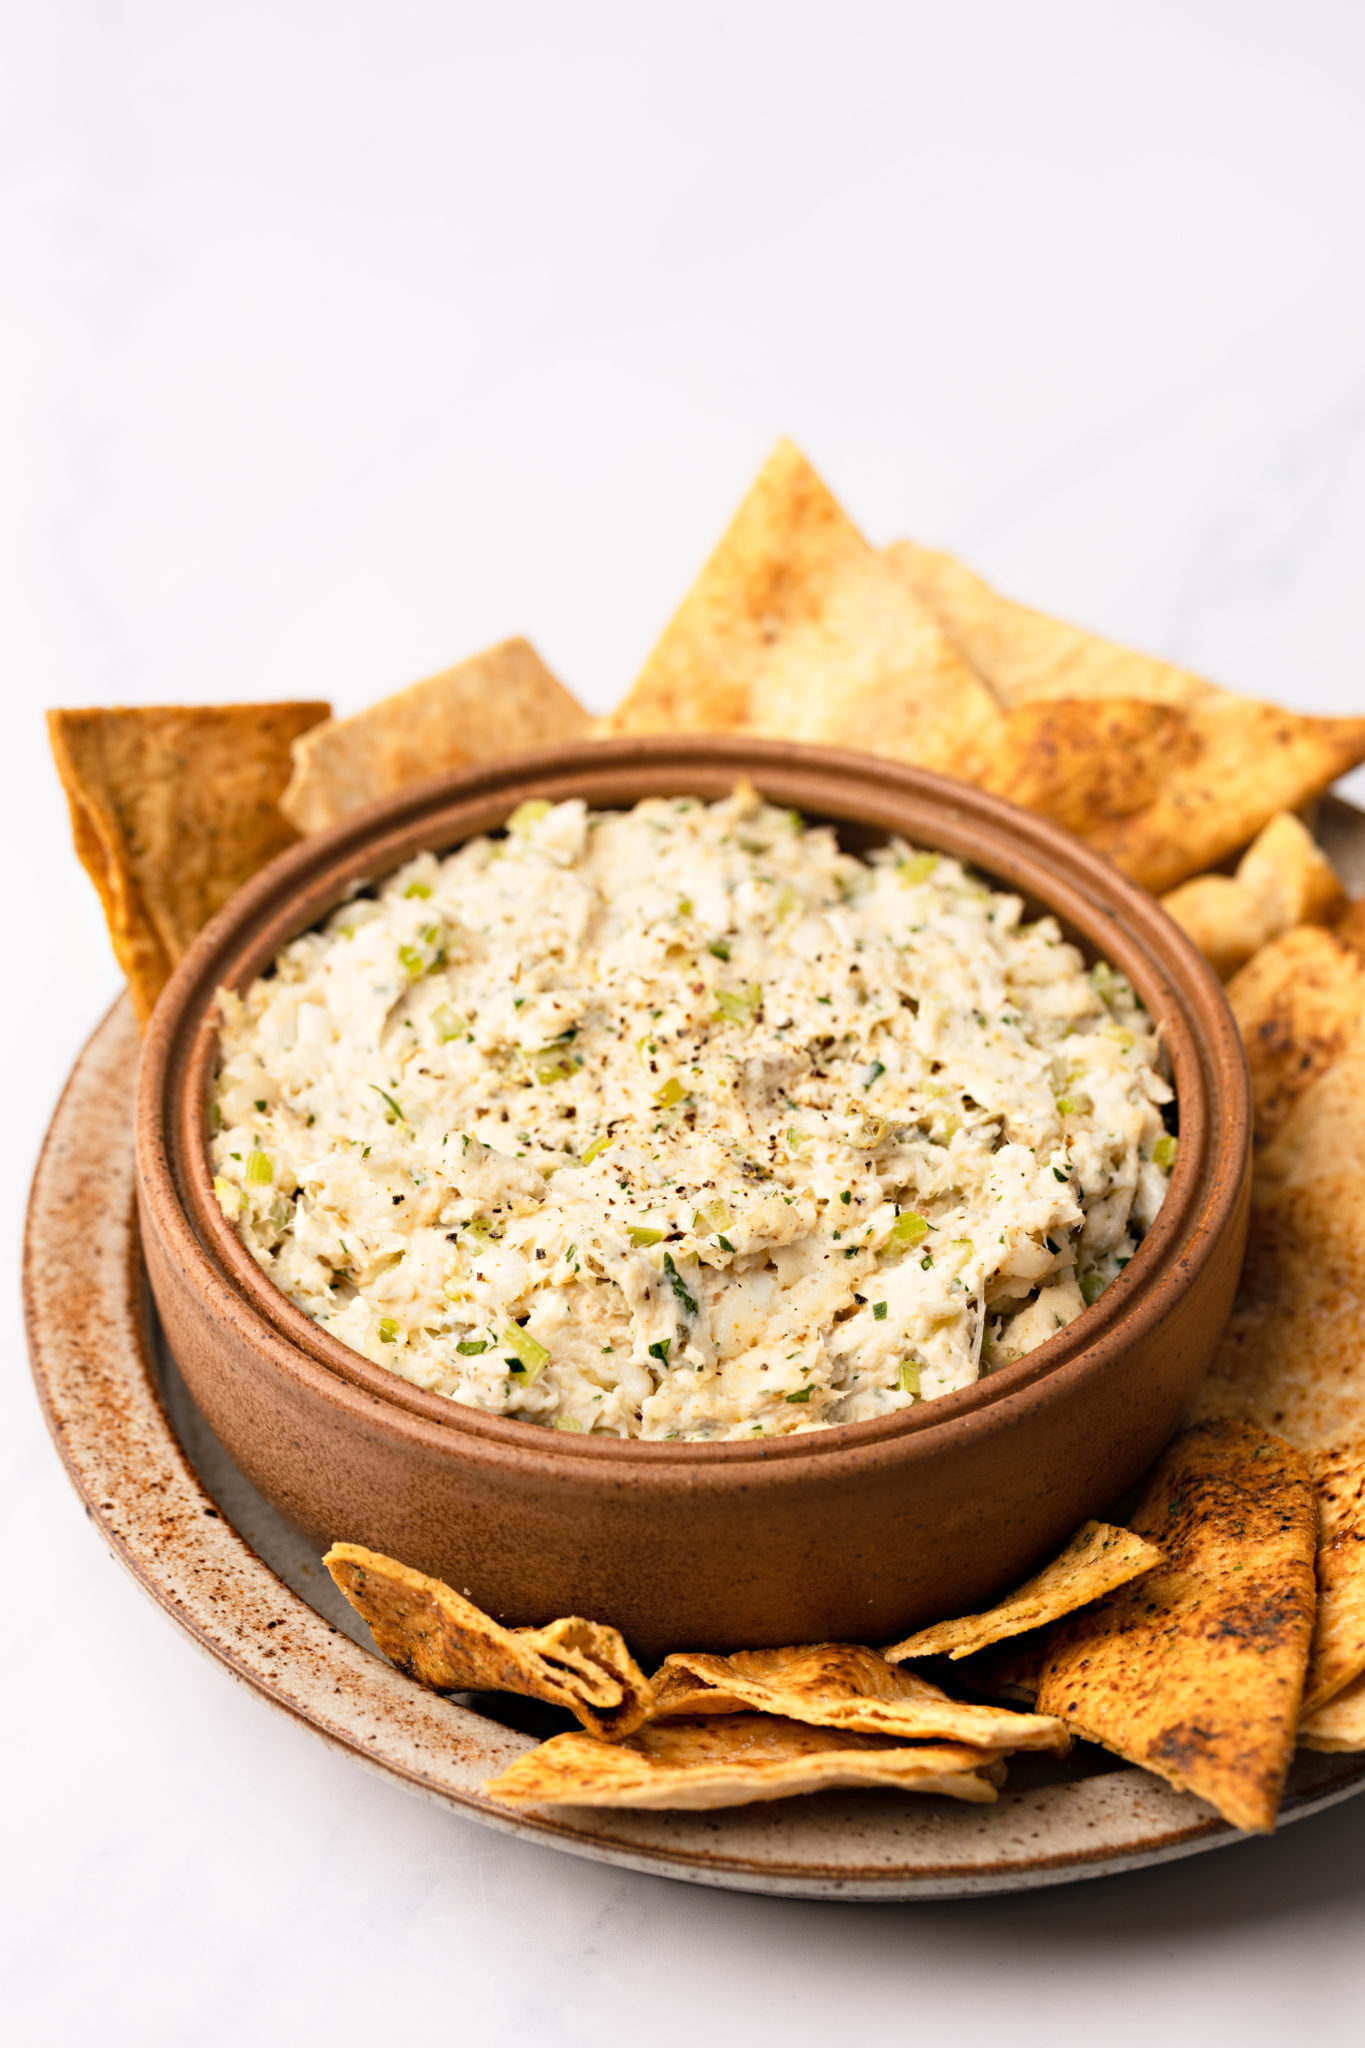 Baked Aquna Cod Dip with celery, horseradish and capers